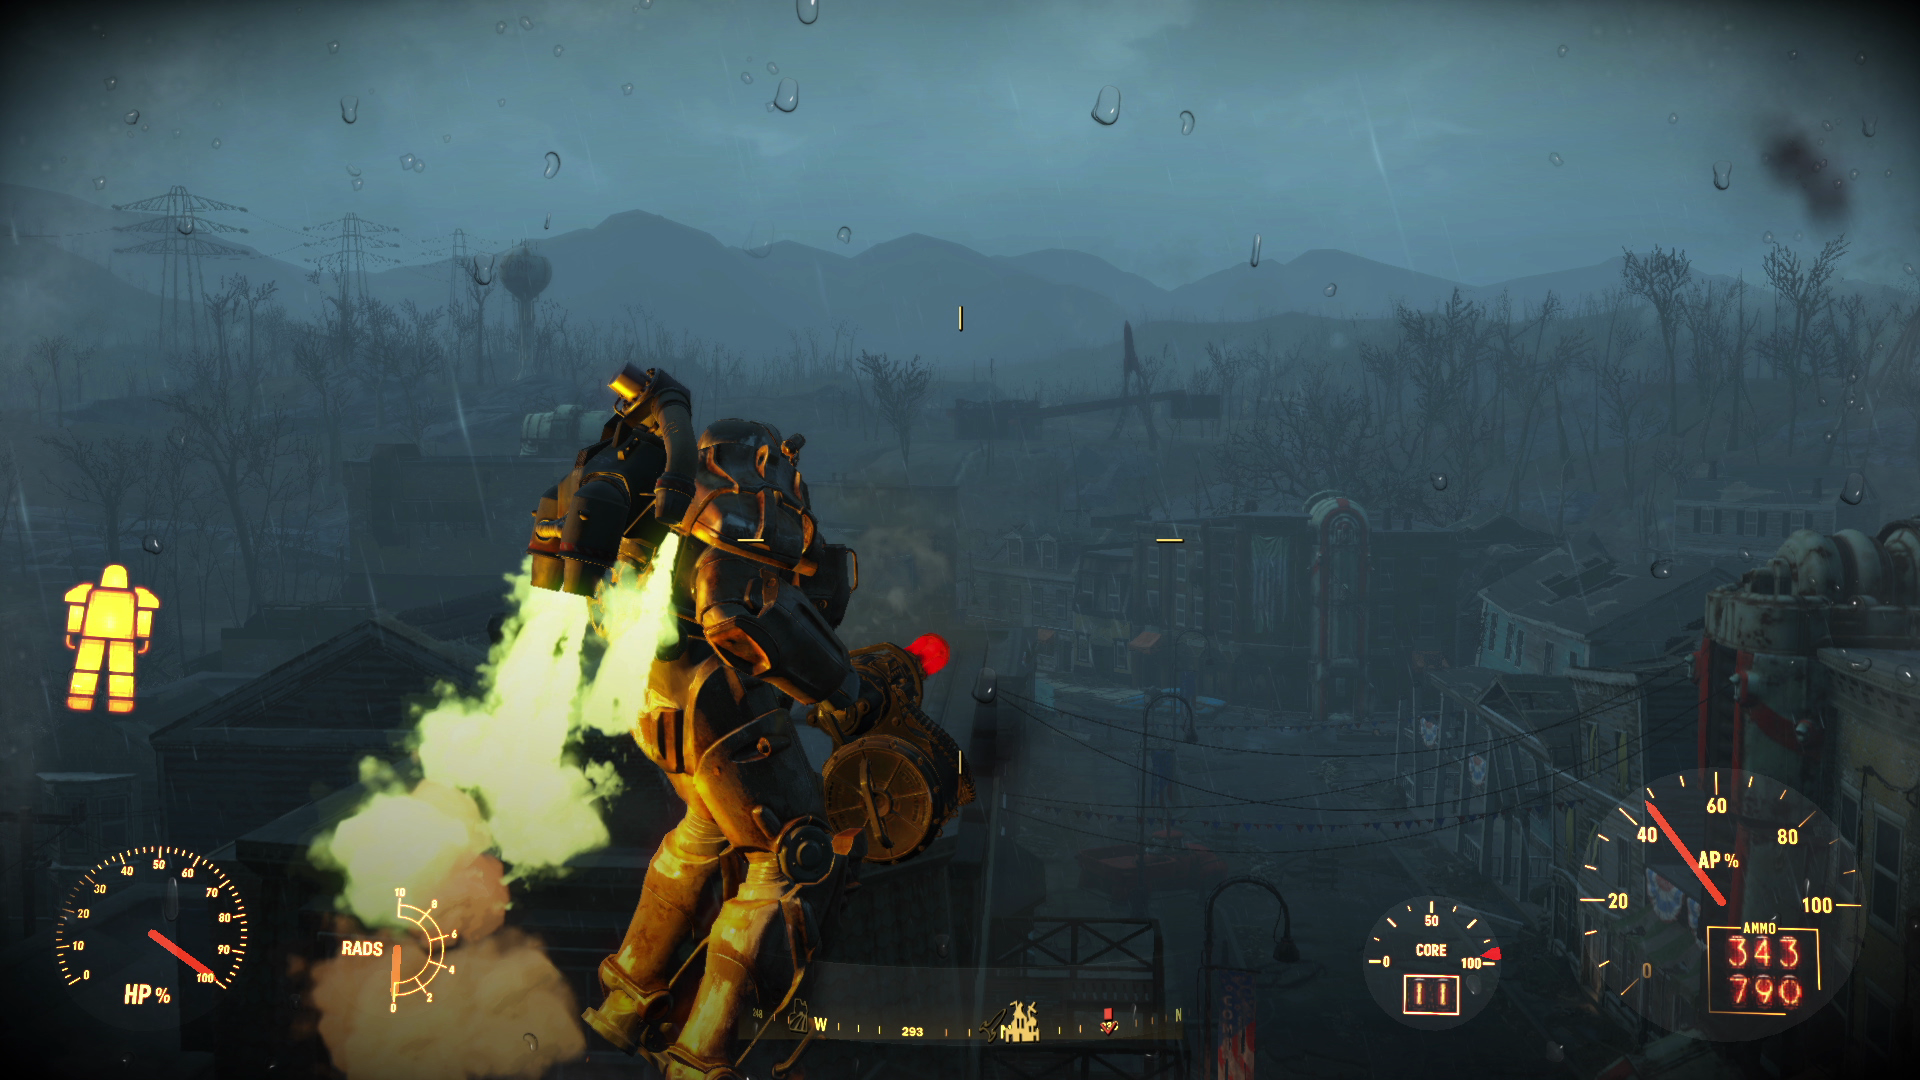 fallout 4 wallpaper,action adventure game,pc game,strategy video game,games,screenshot